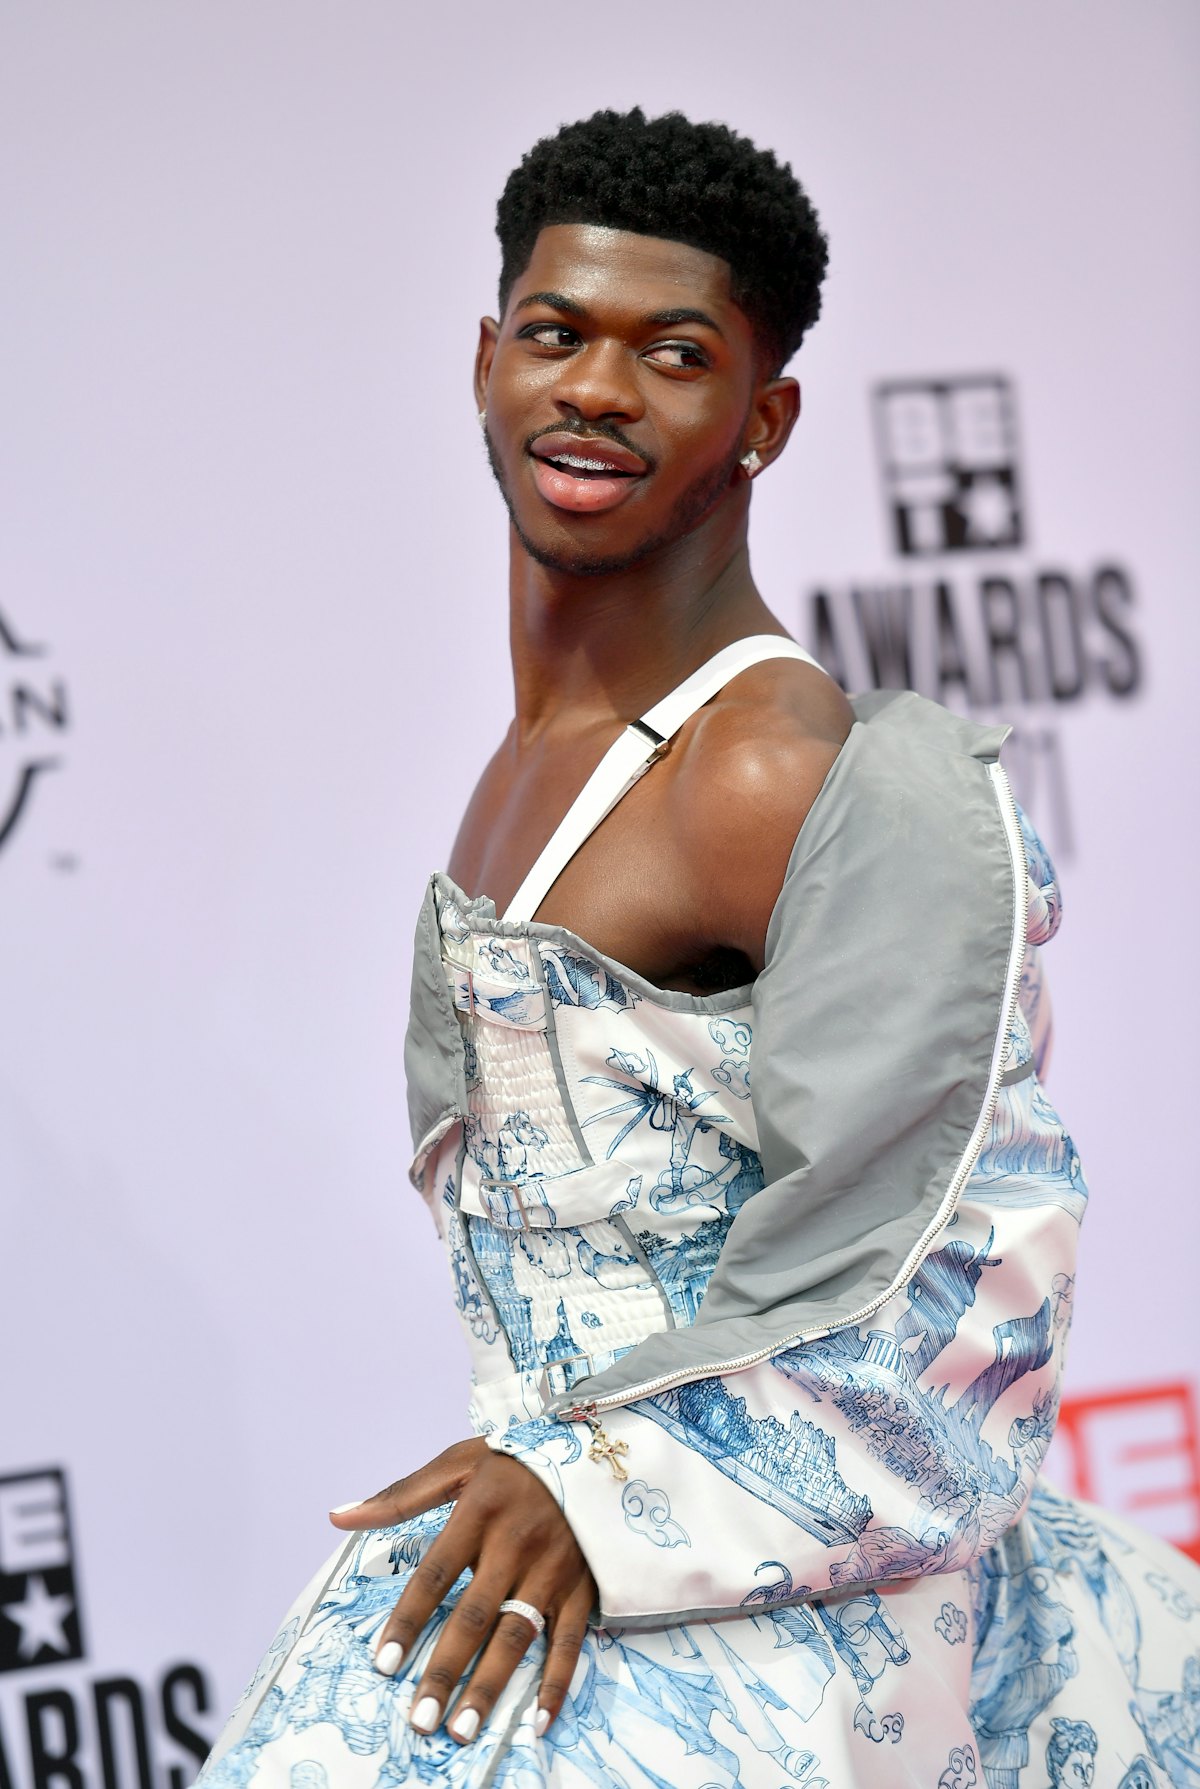 Lil Nas Xs Quotes About Being An Openly Gay Black Rapper Are Eye Opening 5909